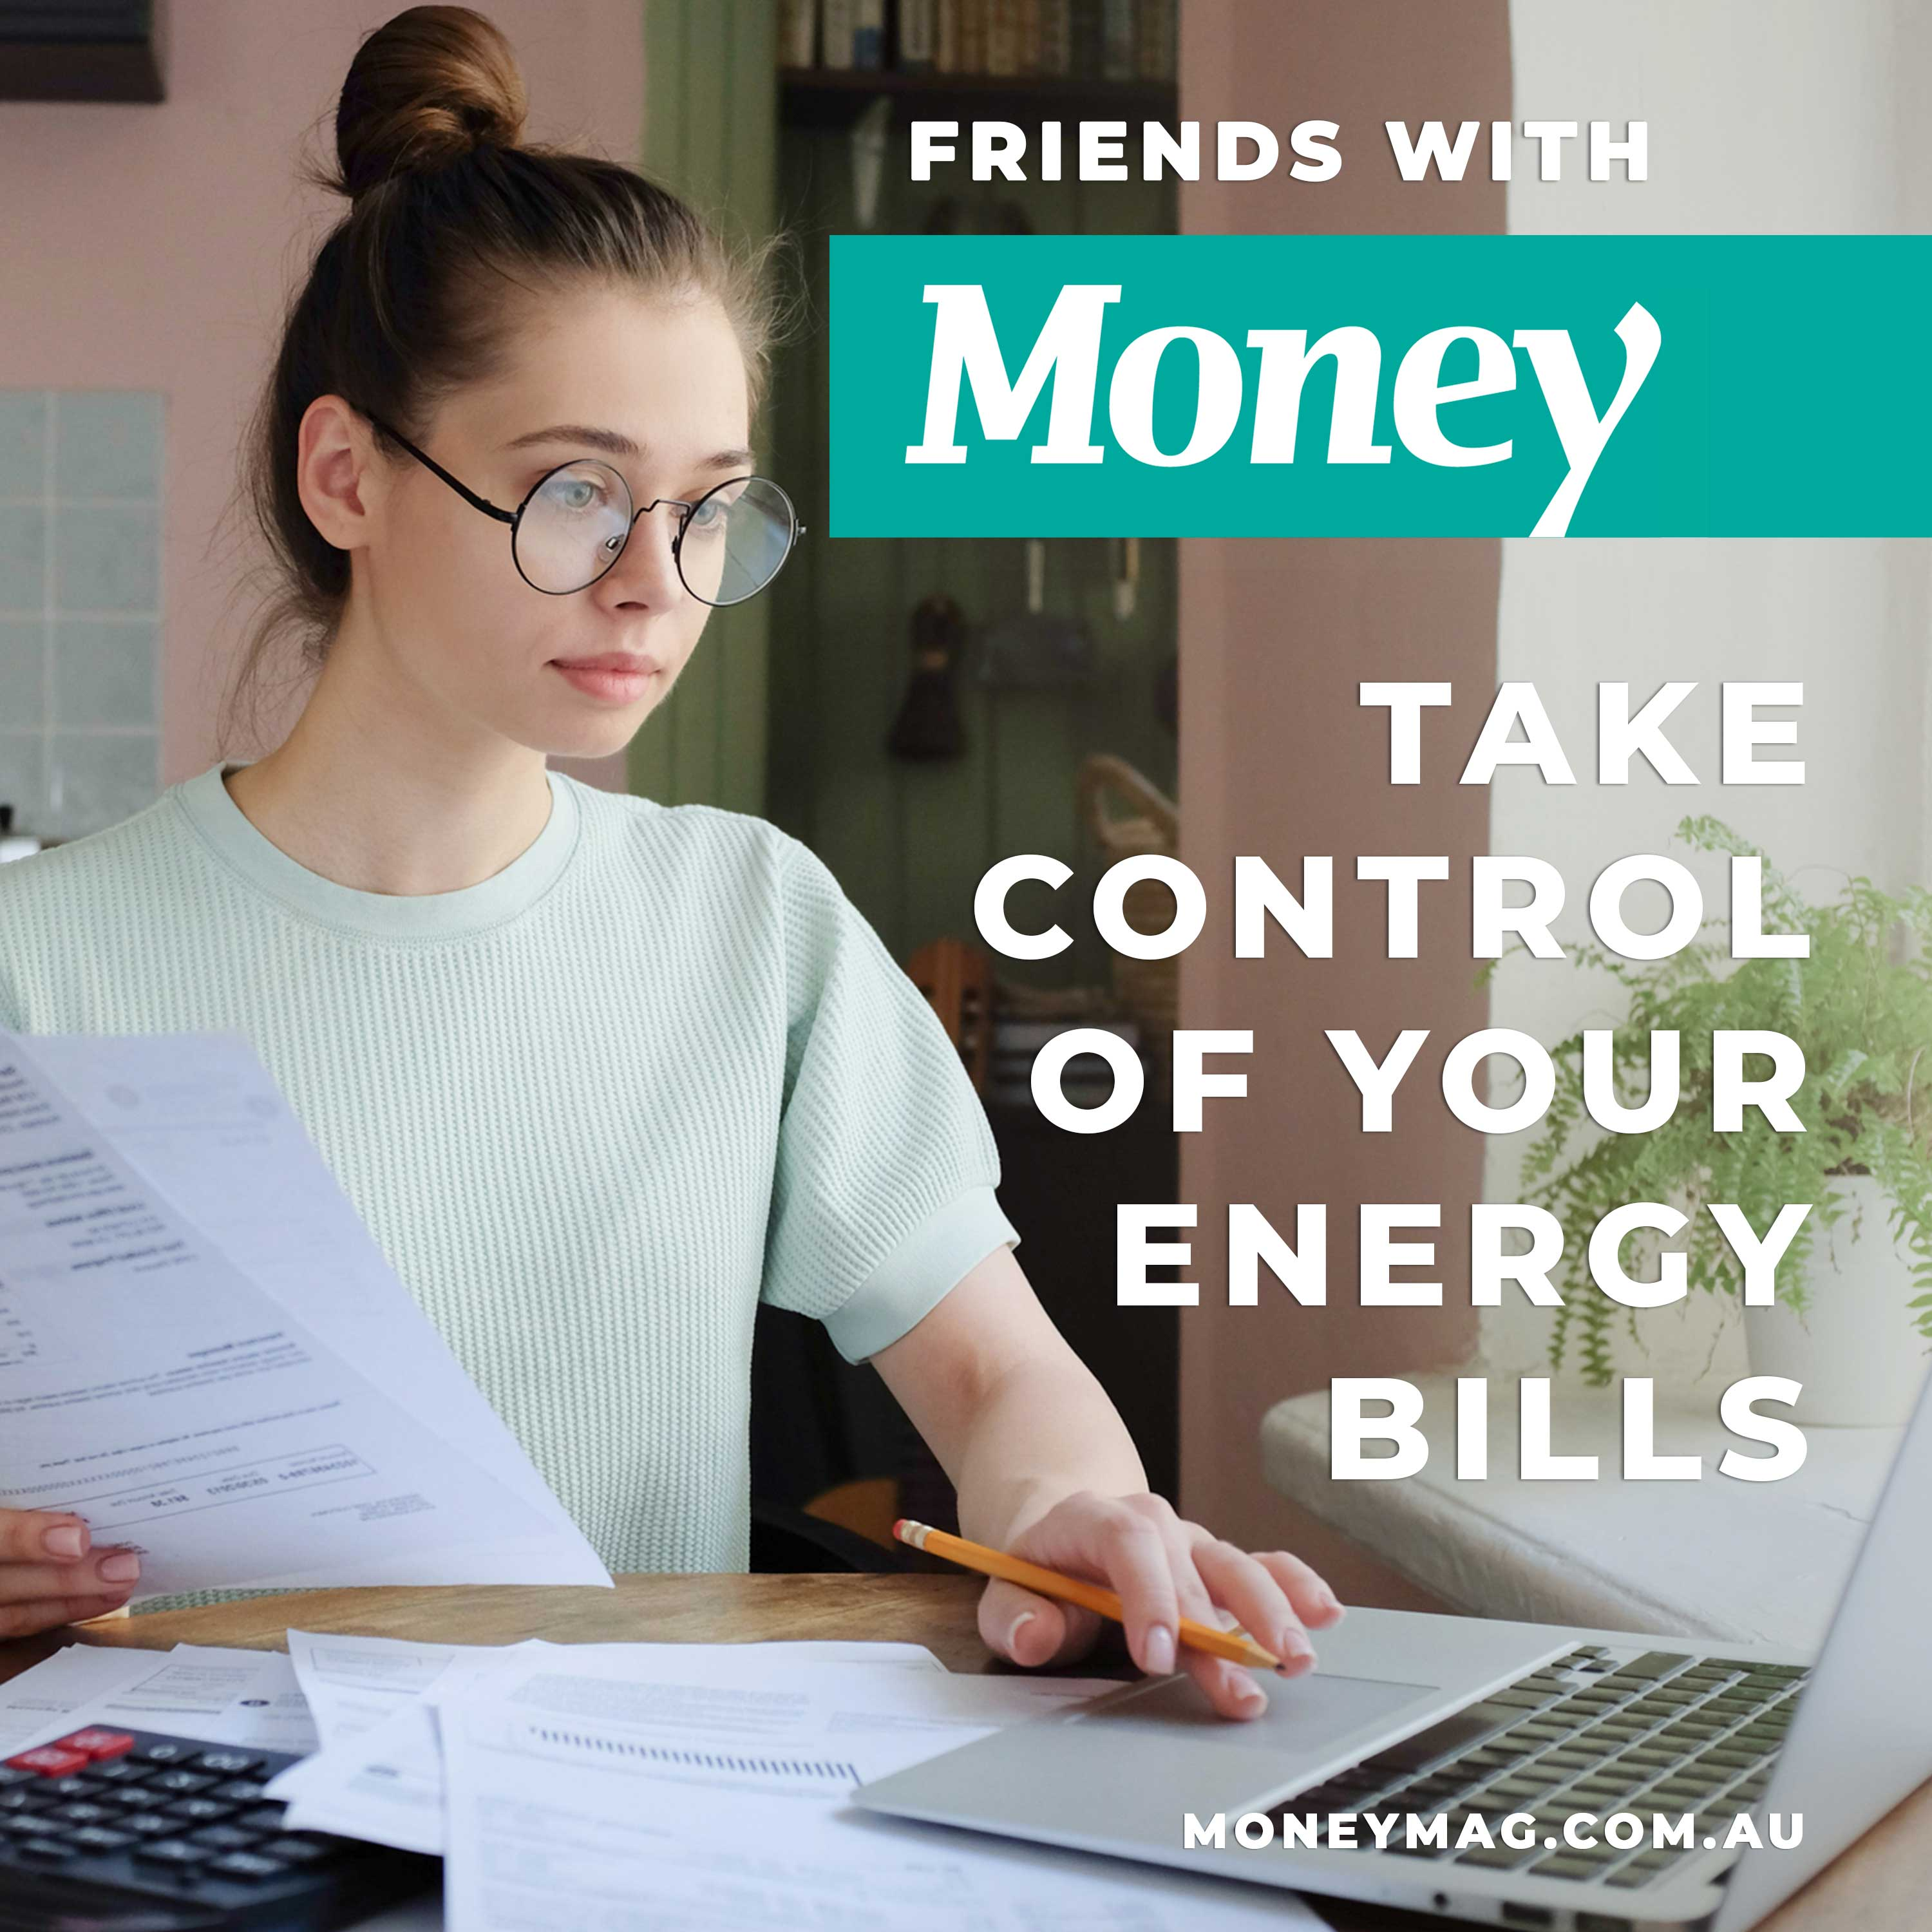 Take control of your energy bills